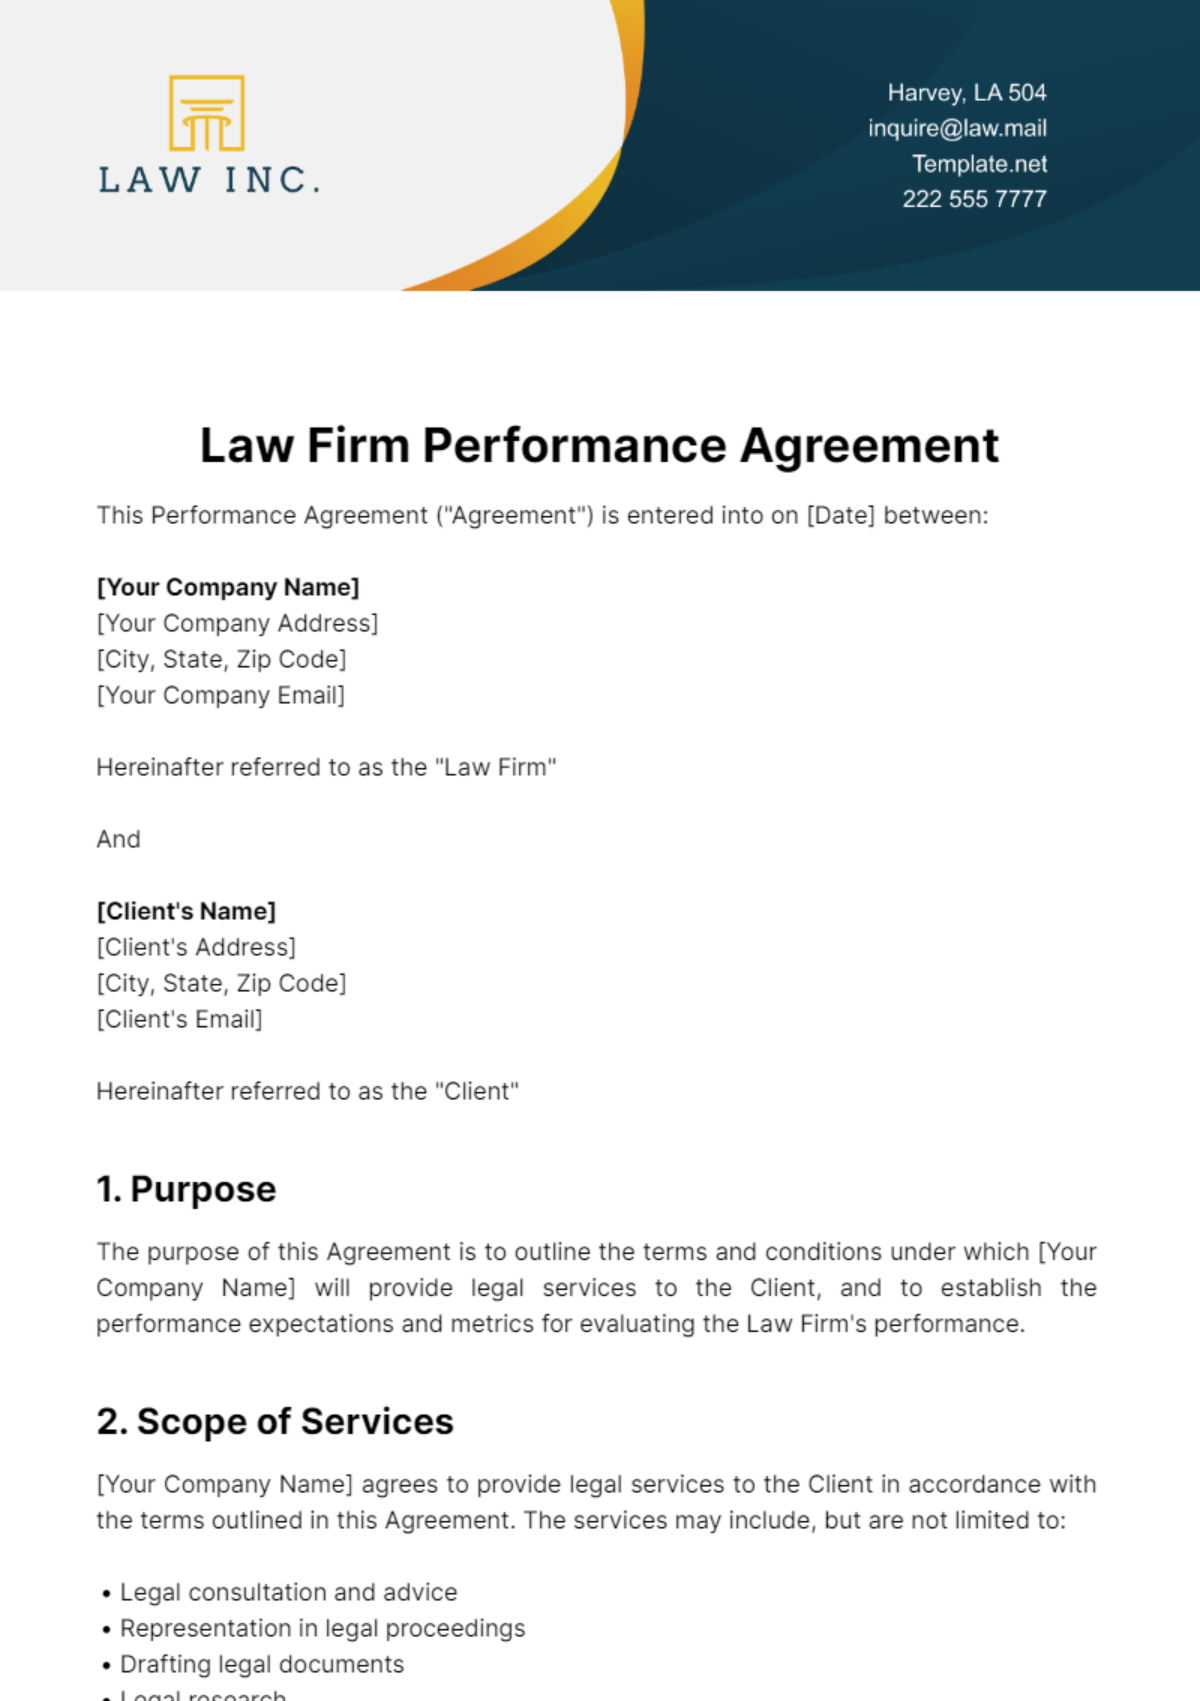 Law Firm Performance Agreement Template